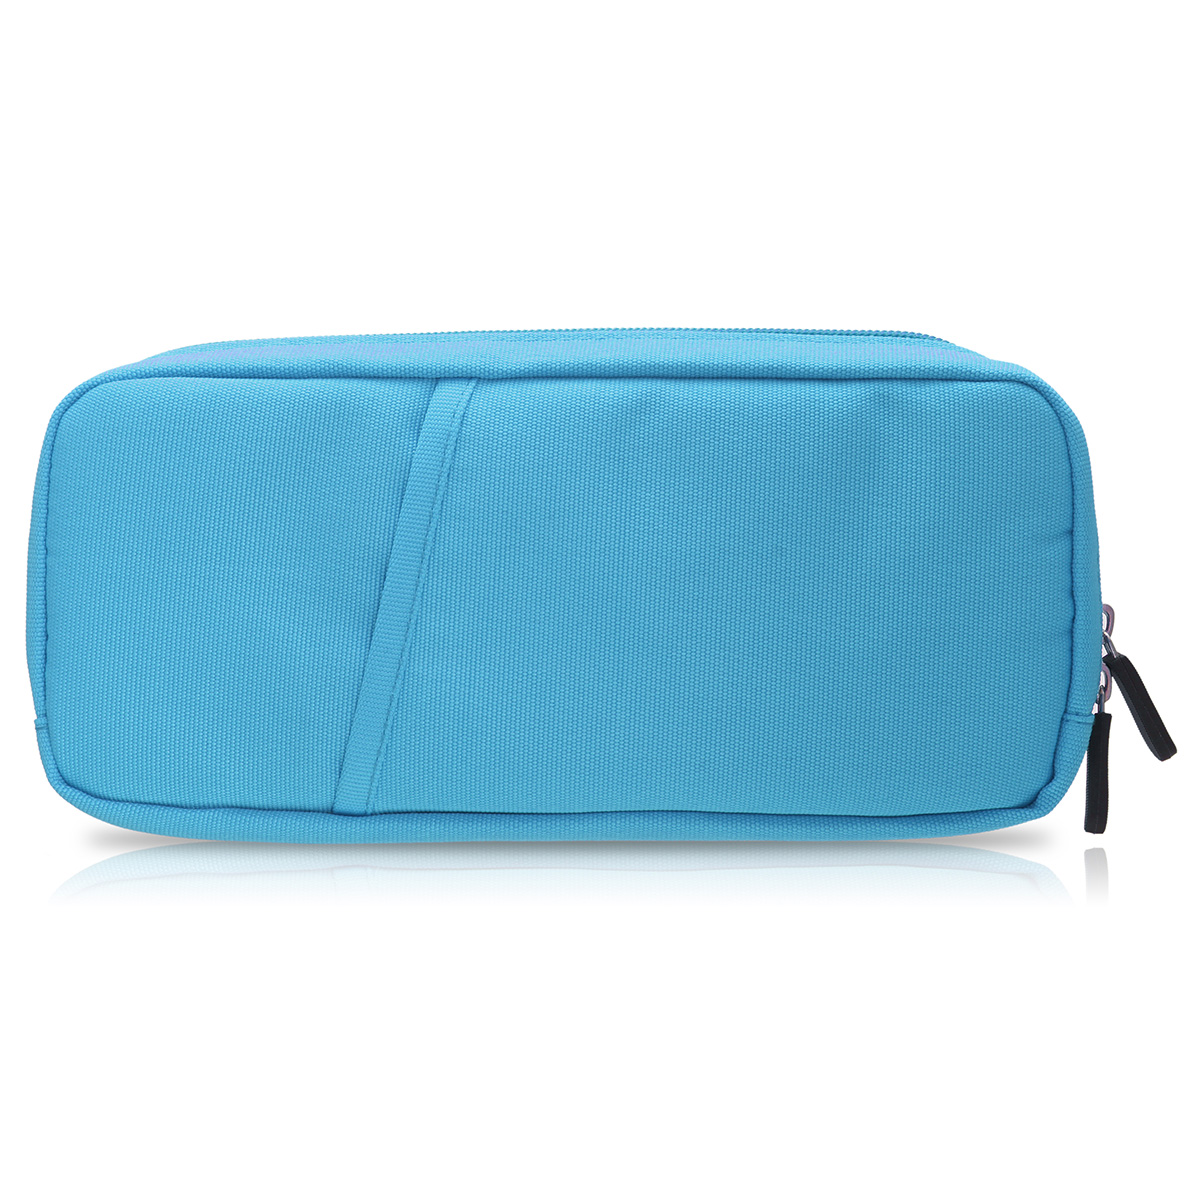 Portable Soft Protective Storage Case Bag For Nintendo Switch Game Console 12